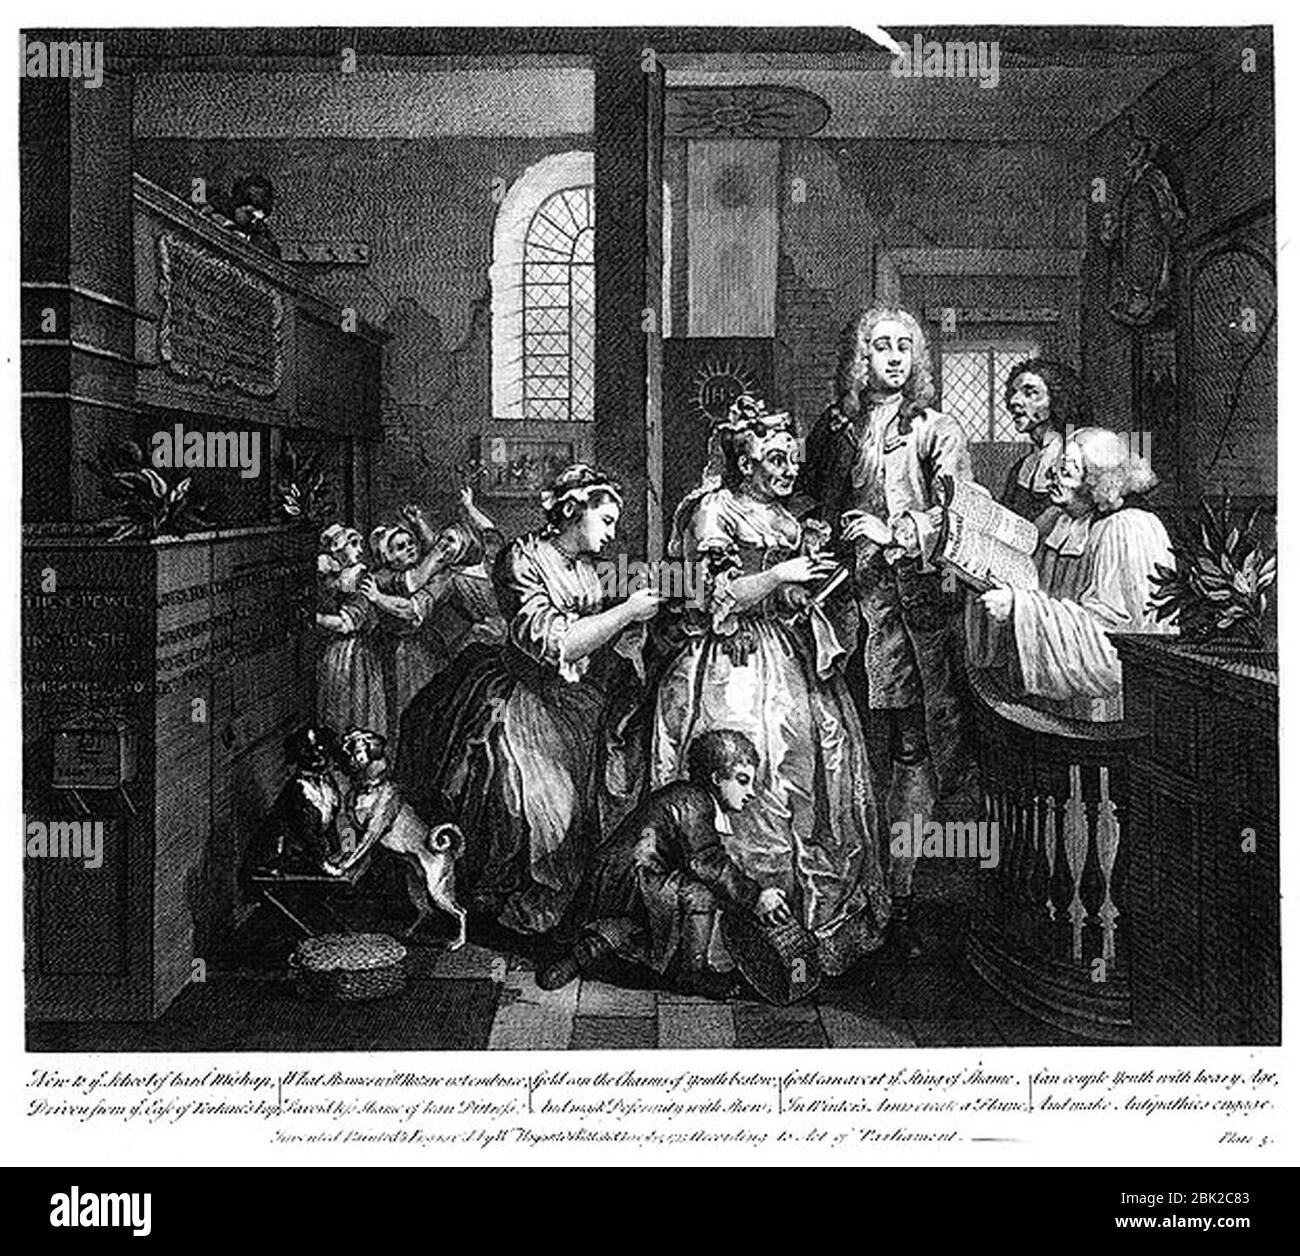 William Hogarth - A Rake's Progress - Plate 5 - Married To An Old Maid. Stock Photo